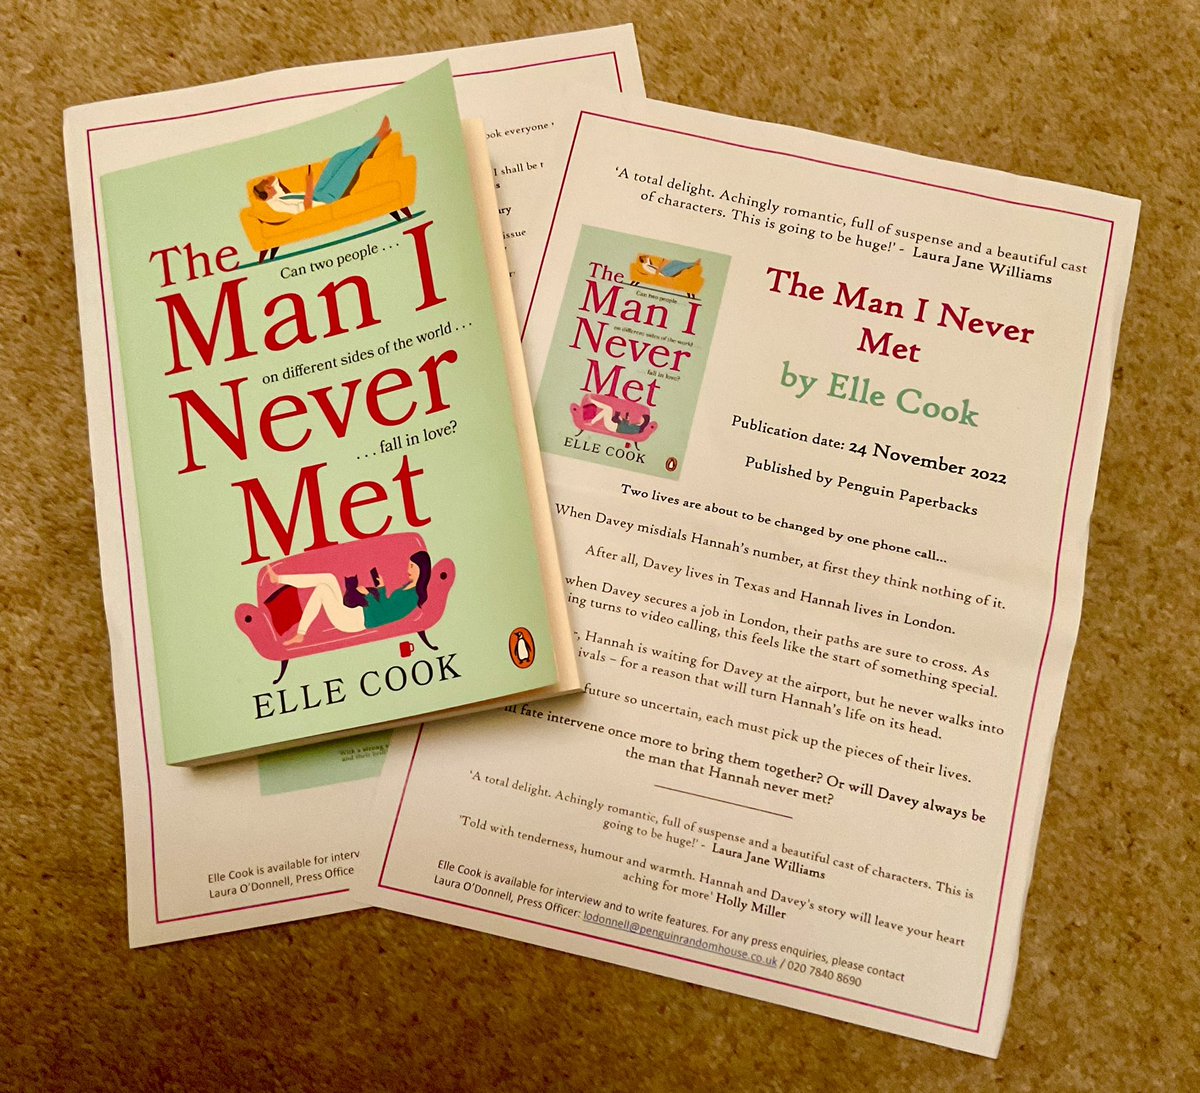 🙏Yet another belated thank you to @lauraodbooks @PenguinUKBooks @centurybooksuk for my surprise copy of #TheManINeverMet by #ElleCook 
Thank you so much for this delightful sounding story! 
Out late November….

“Two lives are about to be changed by one phone call”